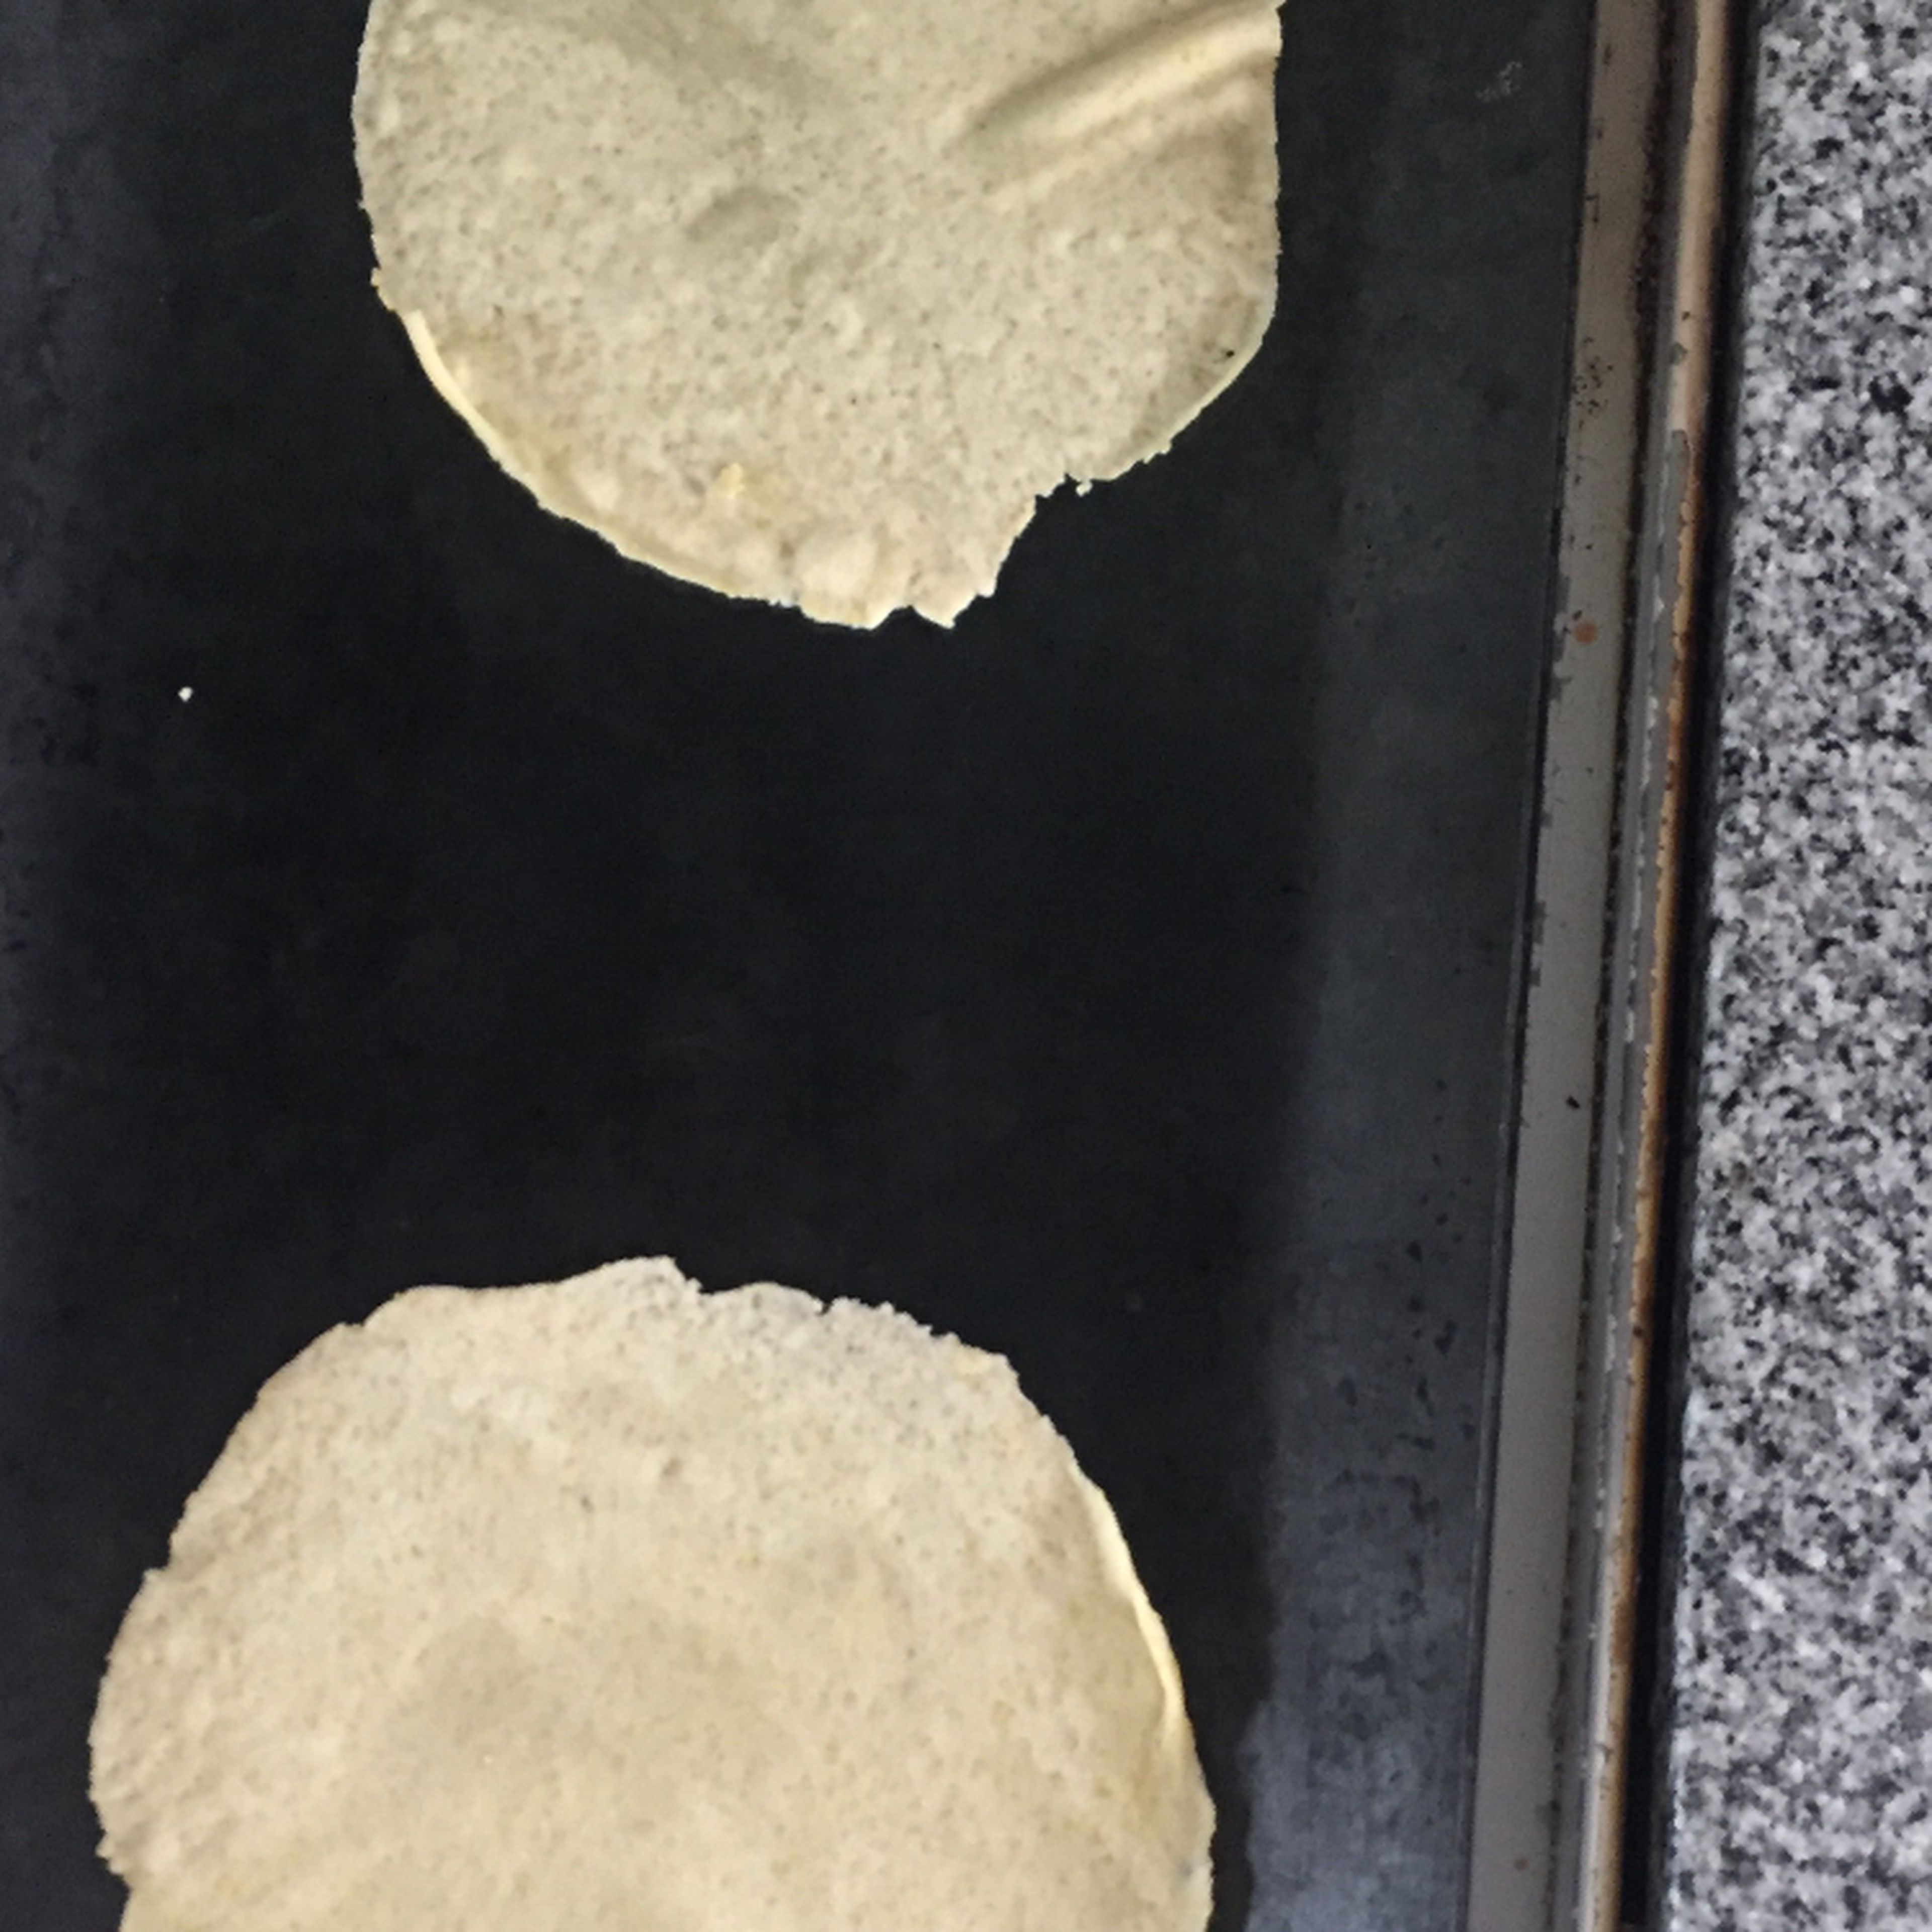 heat up a skillet or pan. Once hot, throw your tortillas over it. Once small bubbles start to form, flip. Do not allow to toast, because this will cause them to break apart once you fold them. (a tip is to make sure that both sides are white with just a few brown spots.)